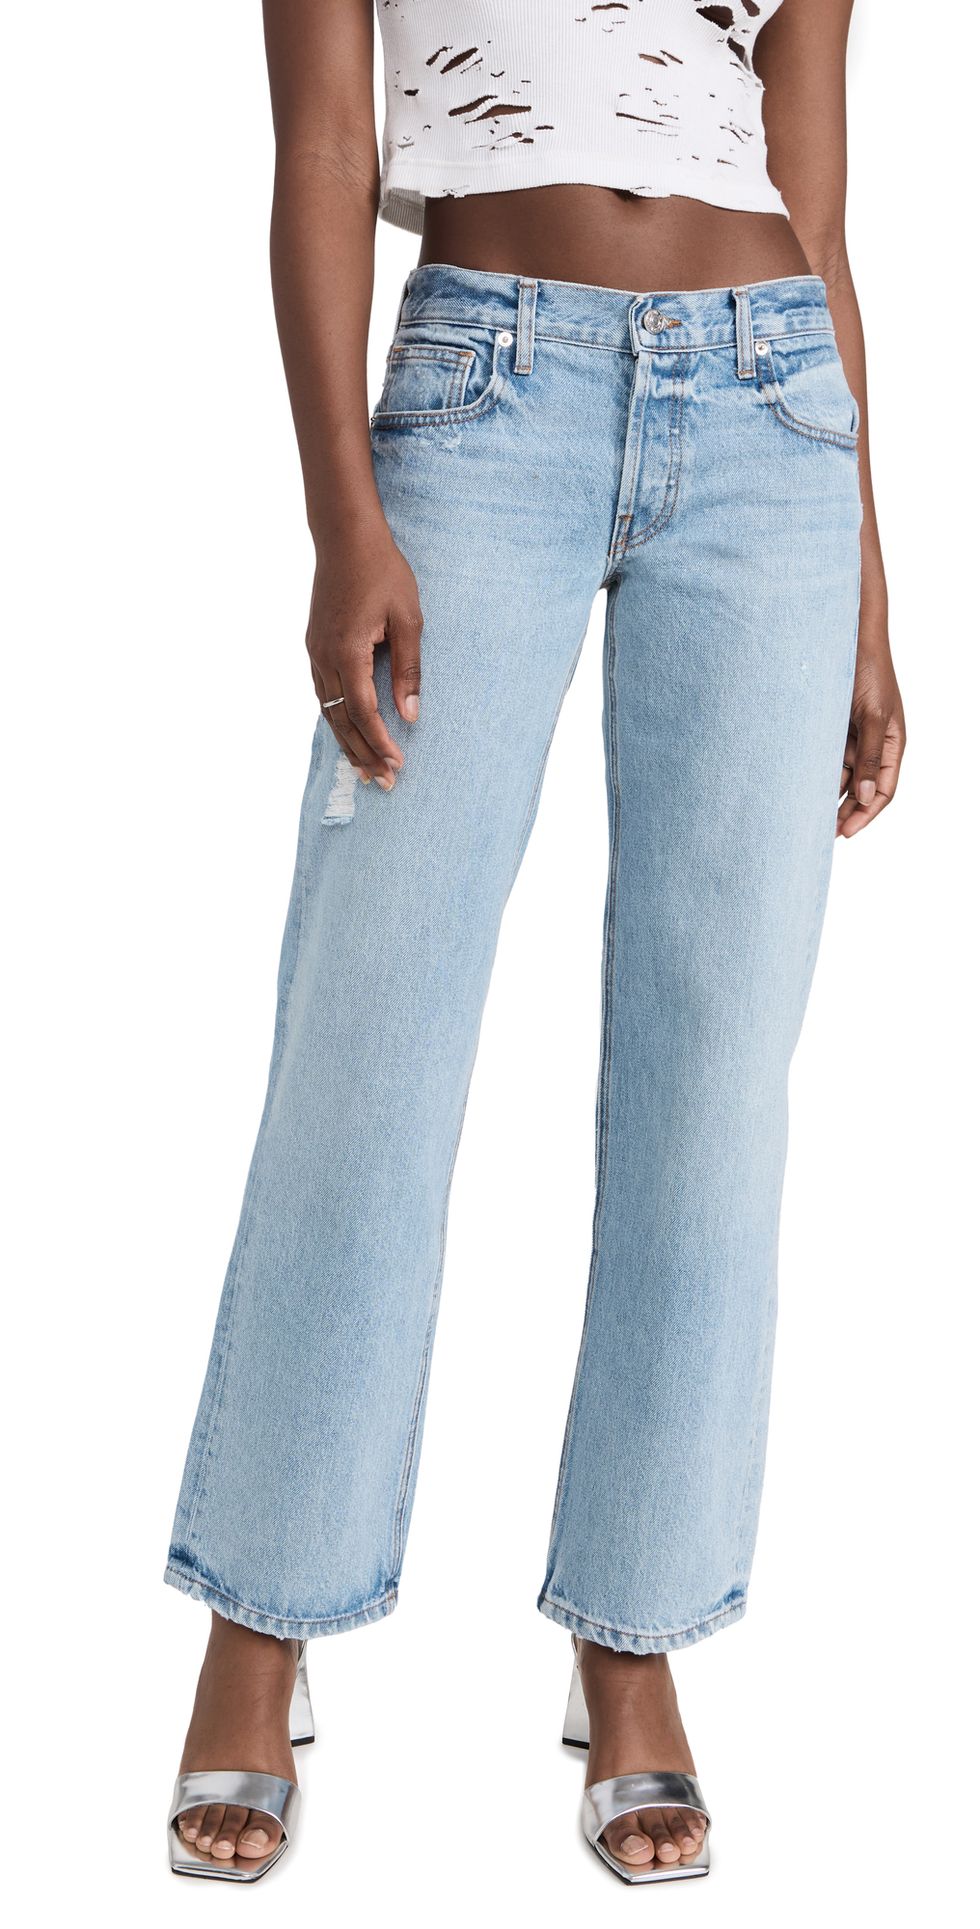 High-Waisted vs Low-Rise Jeans: Which Should I Choose